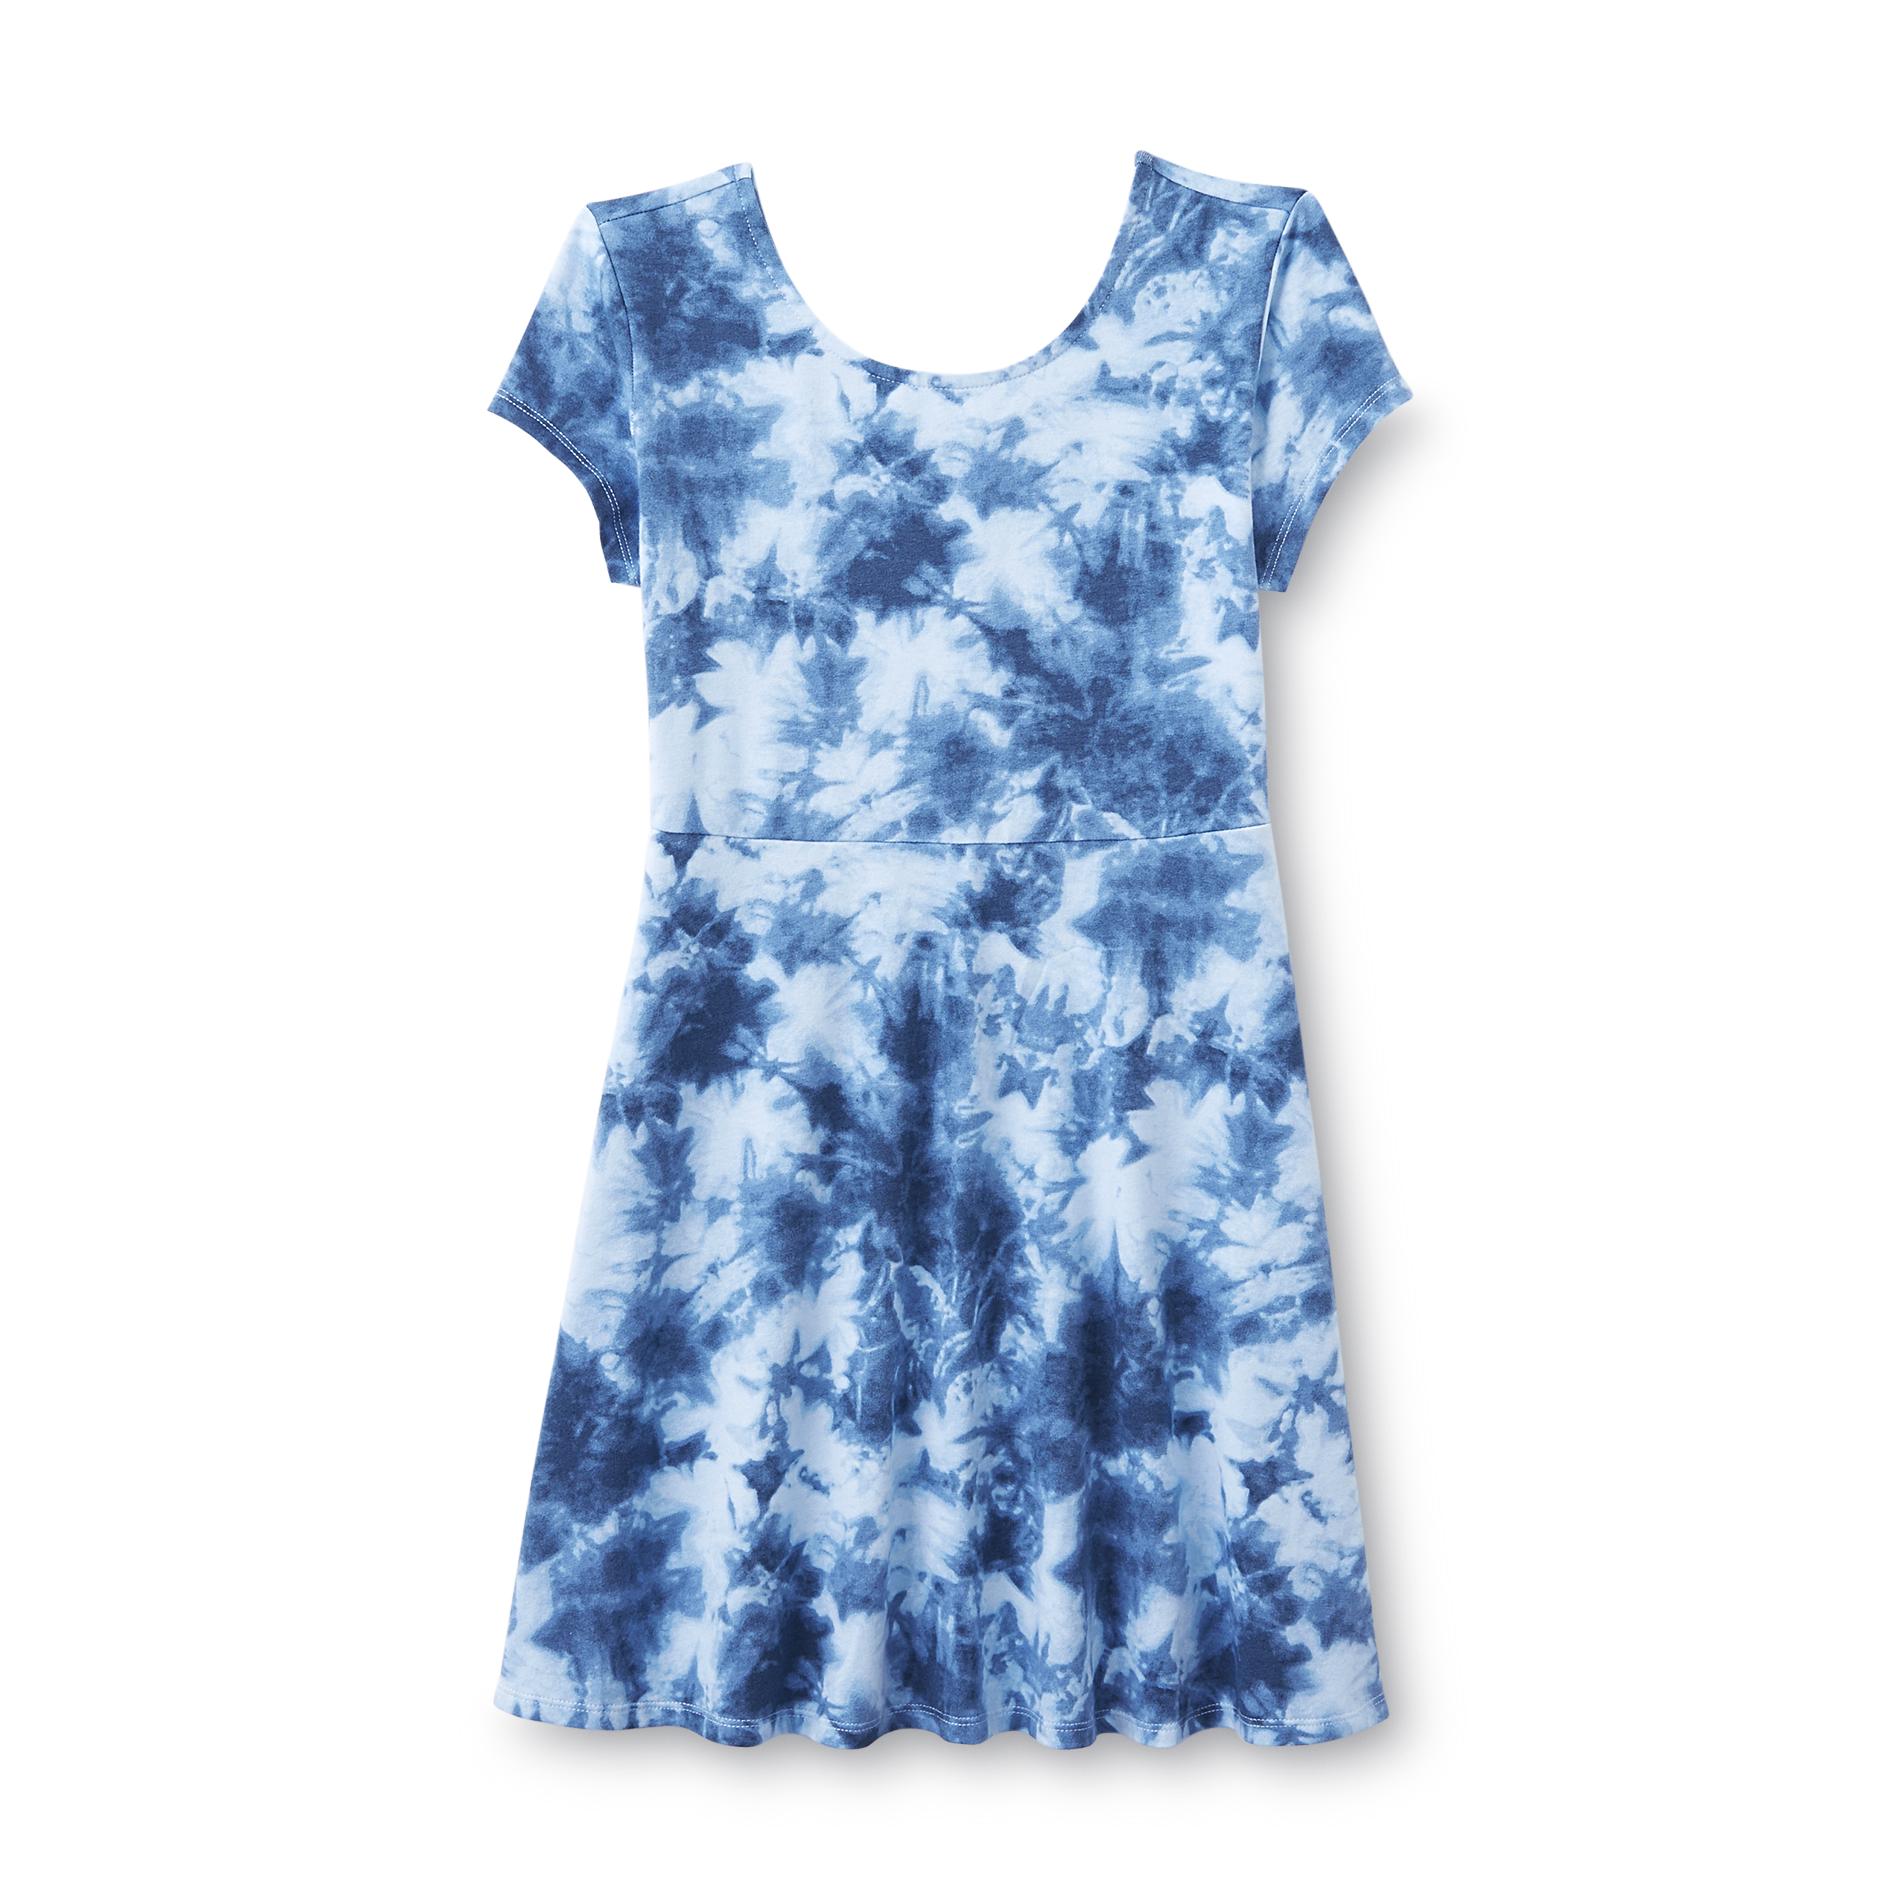 Simply Styled Girl's Skater Dress - Tie-Dyed